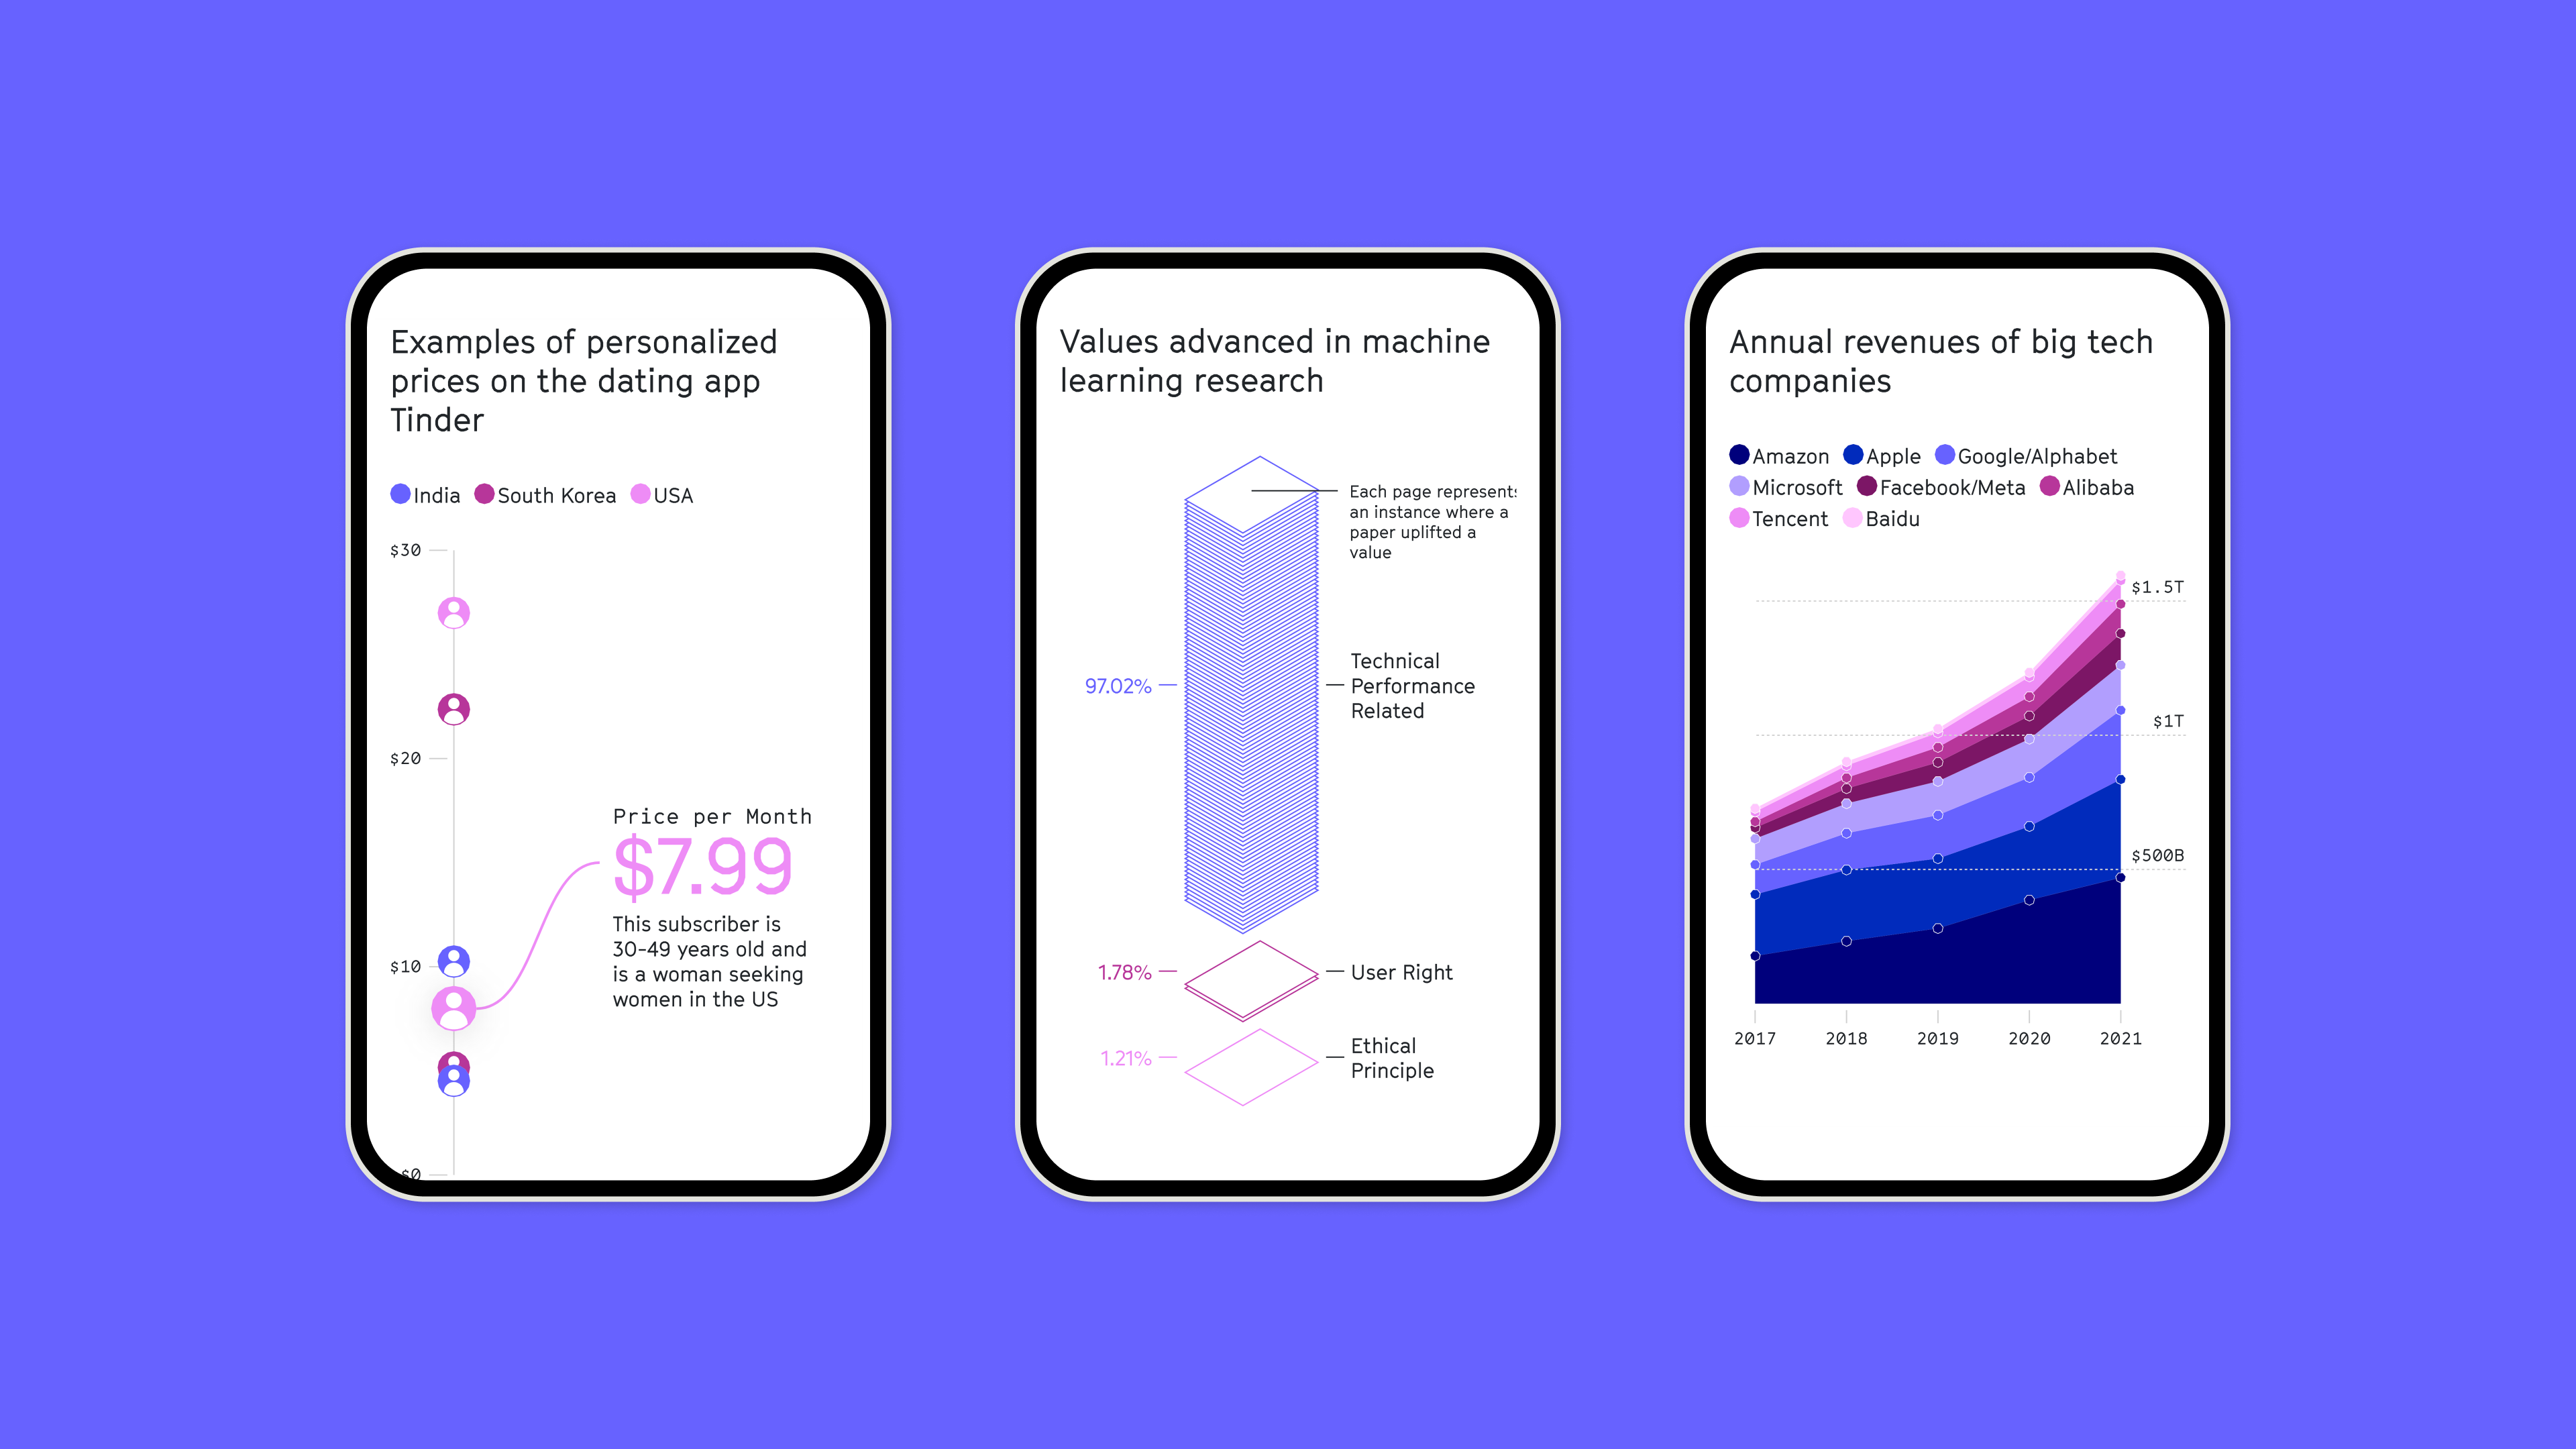 3 smartphone screens showing statistics about the personalized price of the dating app Tinder, the values advanced in machine learning and the annual revenue of big tech companies.